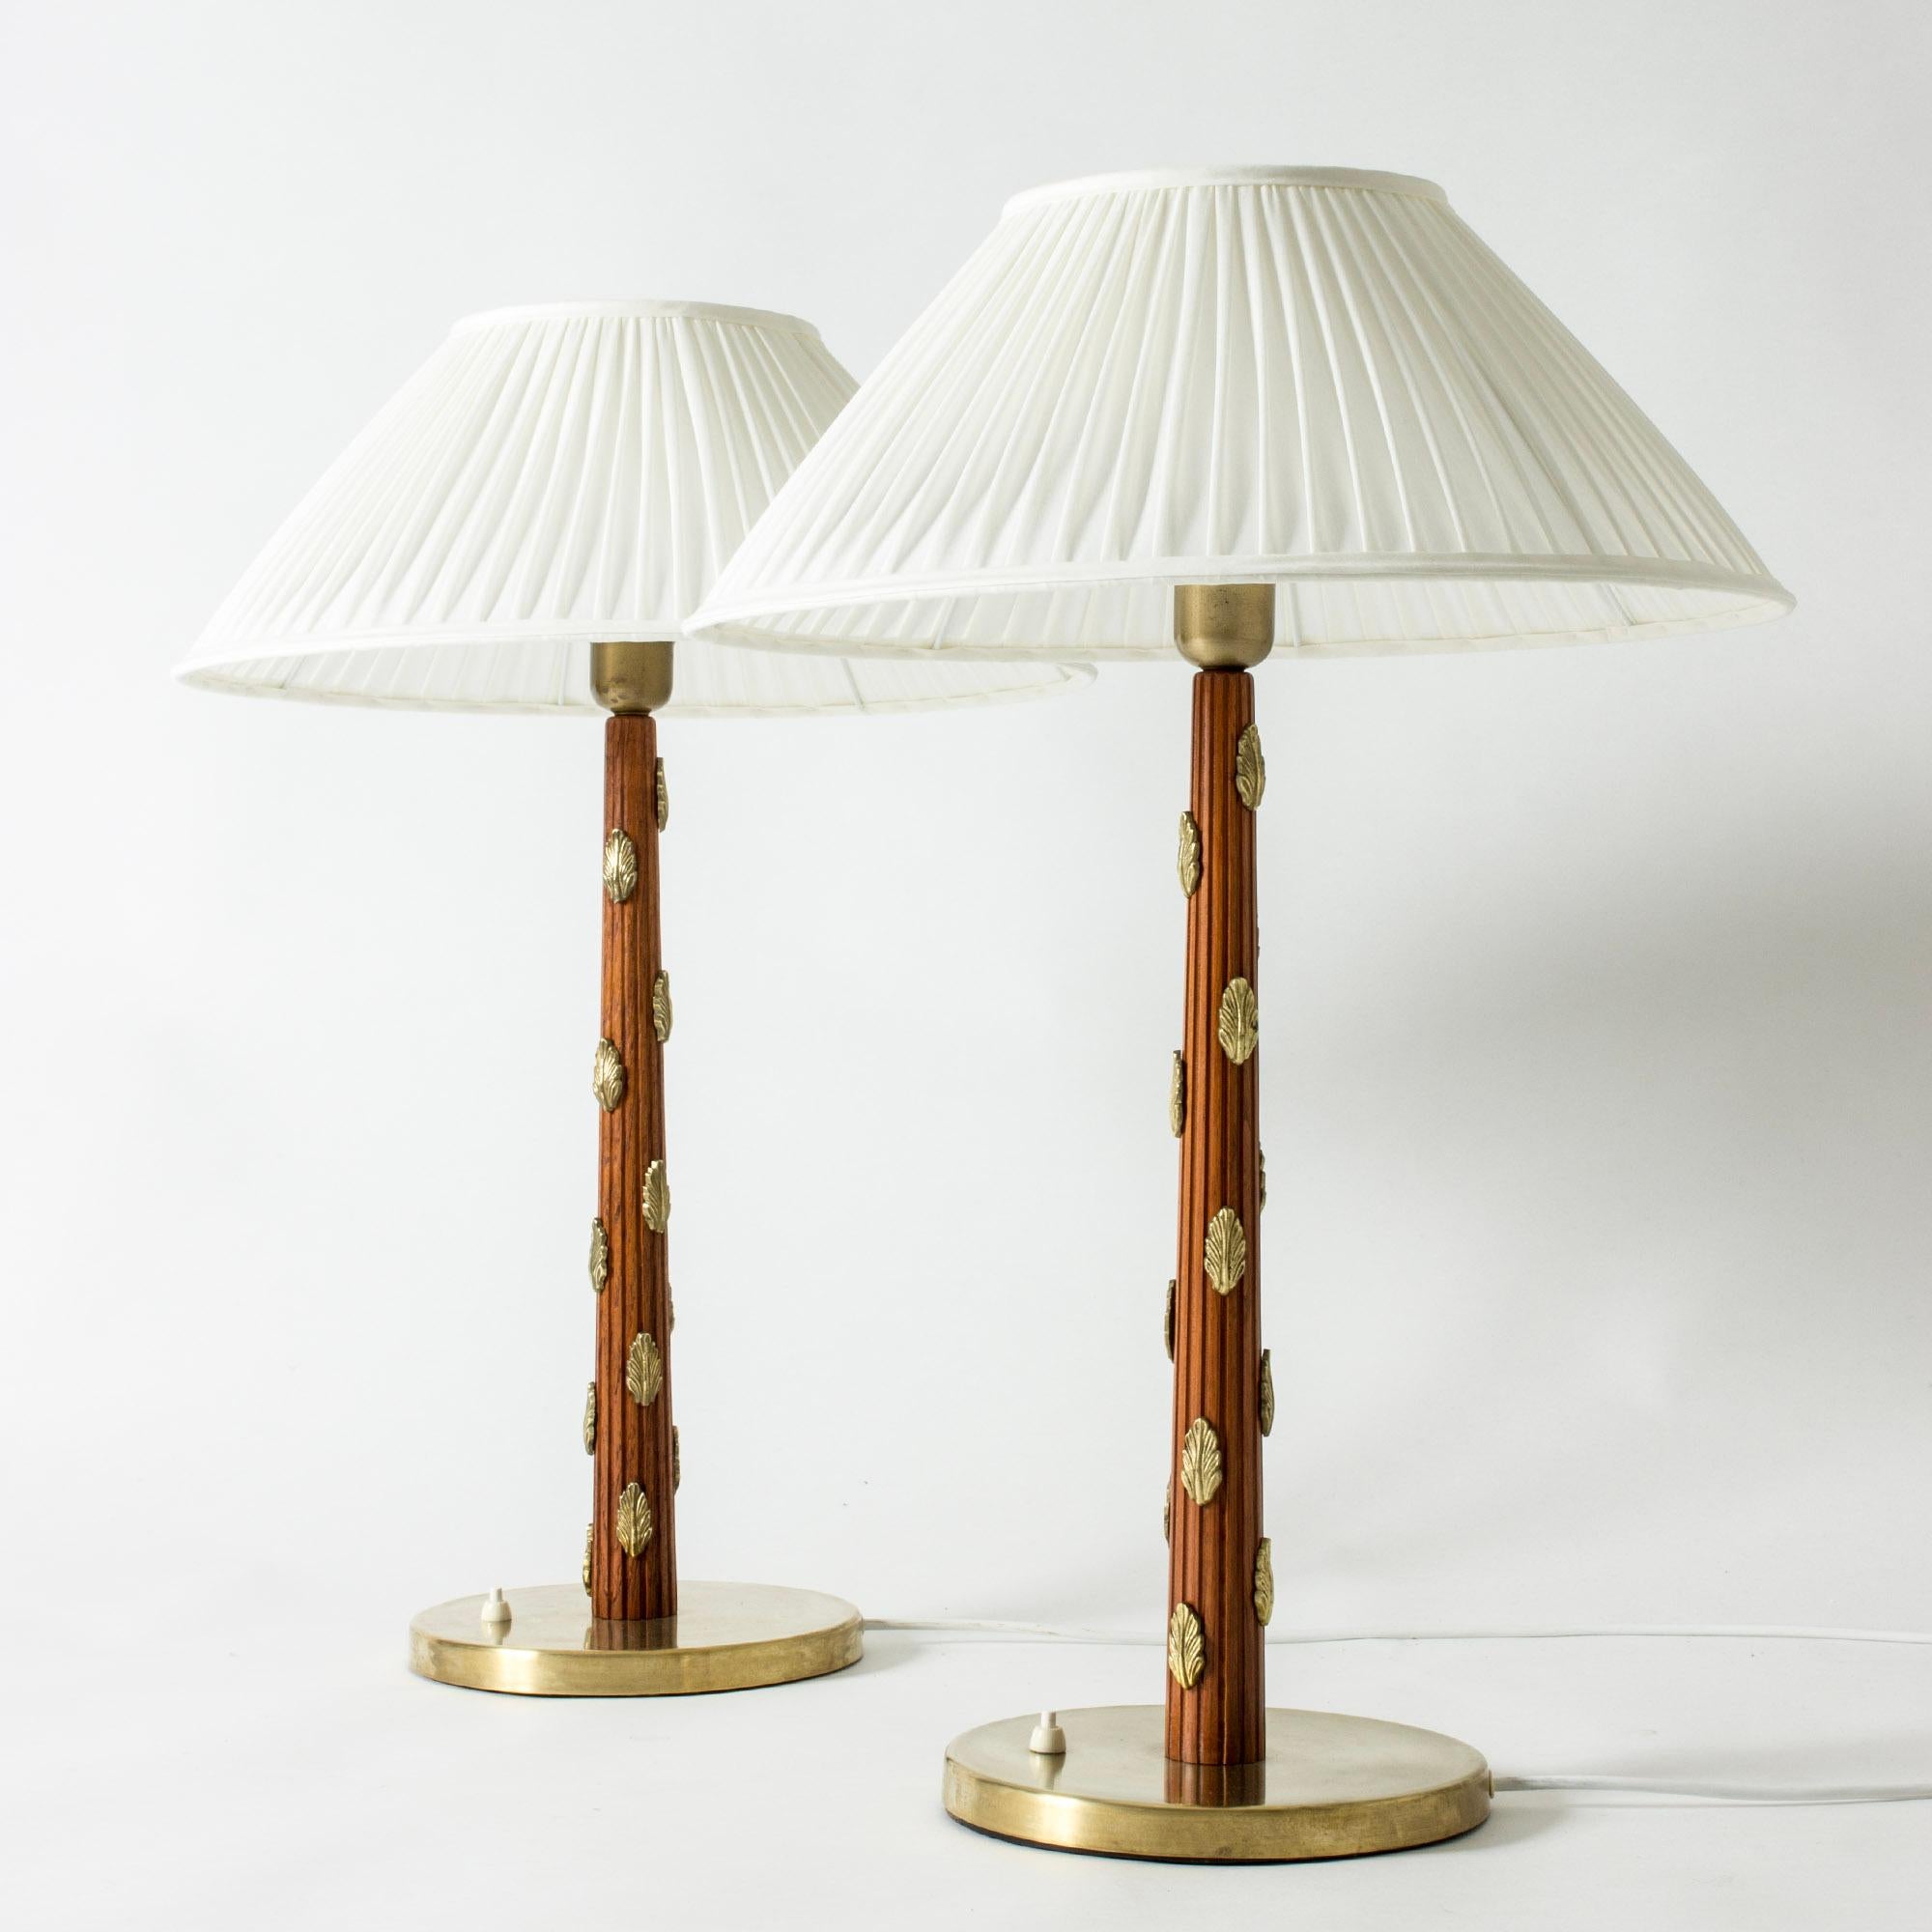 Pair of stunning oversized table lamps by Hans Bergström, made in the late 1930s. Mahogany stems embossed with stripes and decorated with beautiful appliquéd brass leaves. Pleated shades.

Hans Bergström was the owner and creative director of the